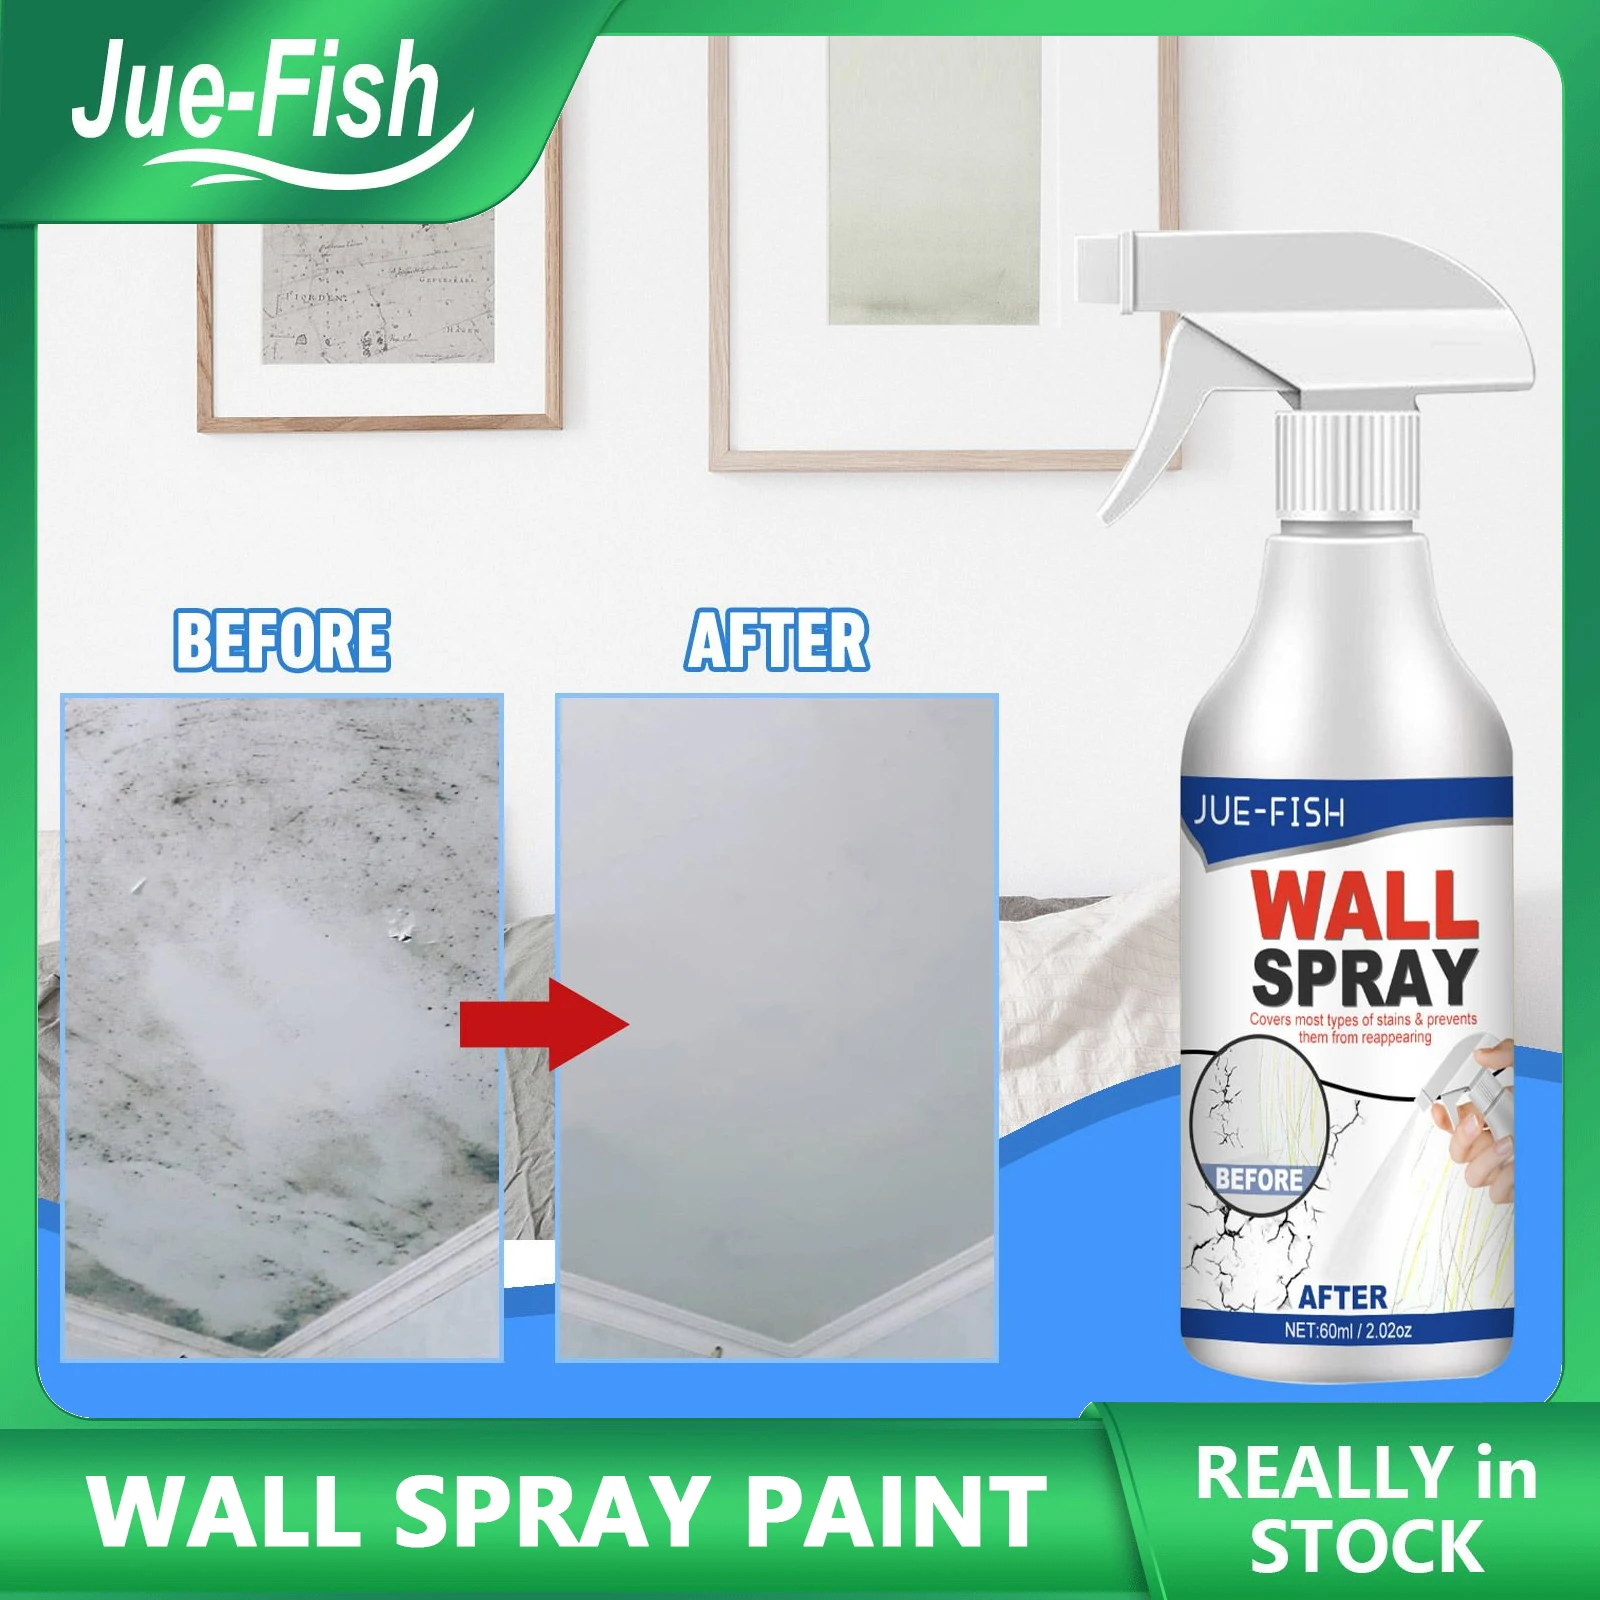 Wall Spray Paint Cover Wall Stains Defects Breakage Repair Wall Peeling Deep Reinforced Wall Home Refurbishing Restoration Agent